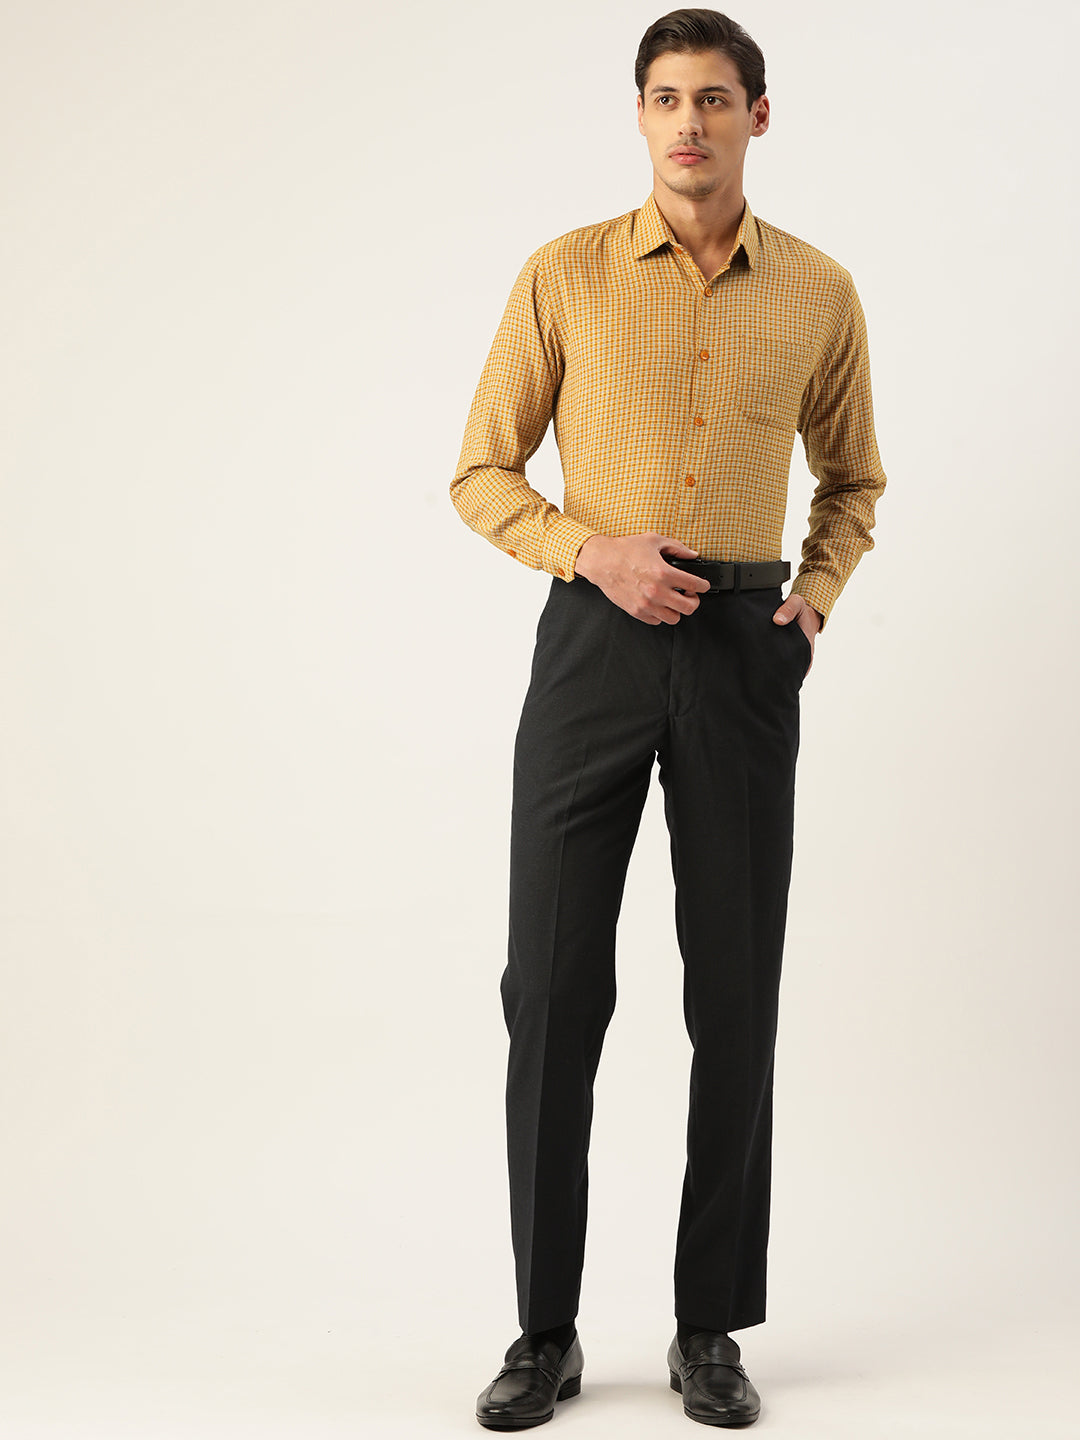 Brown pants stock photo. Image of style, beautiful, design - 86463082